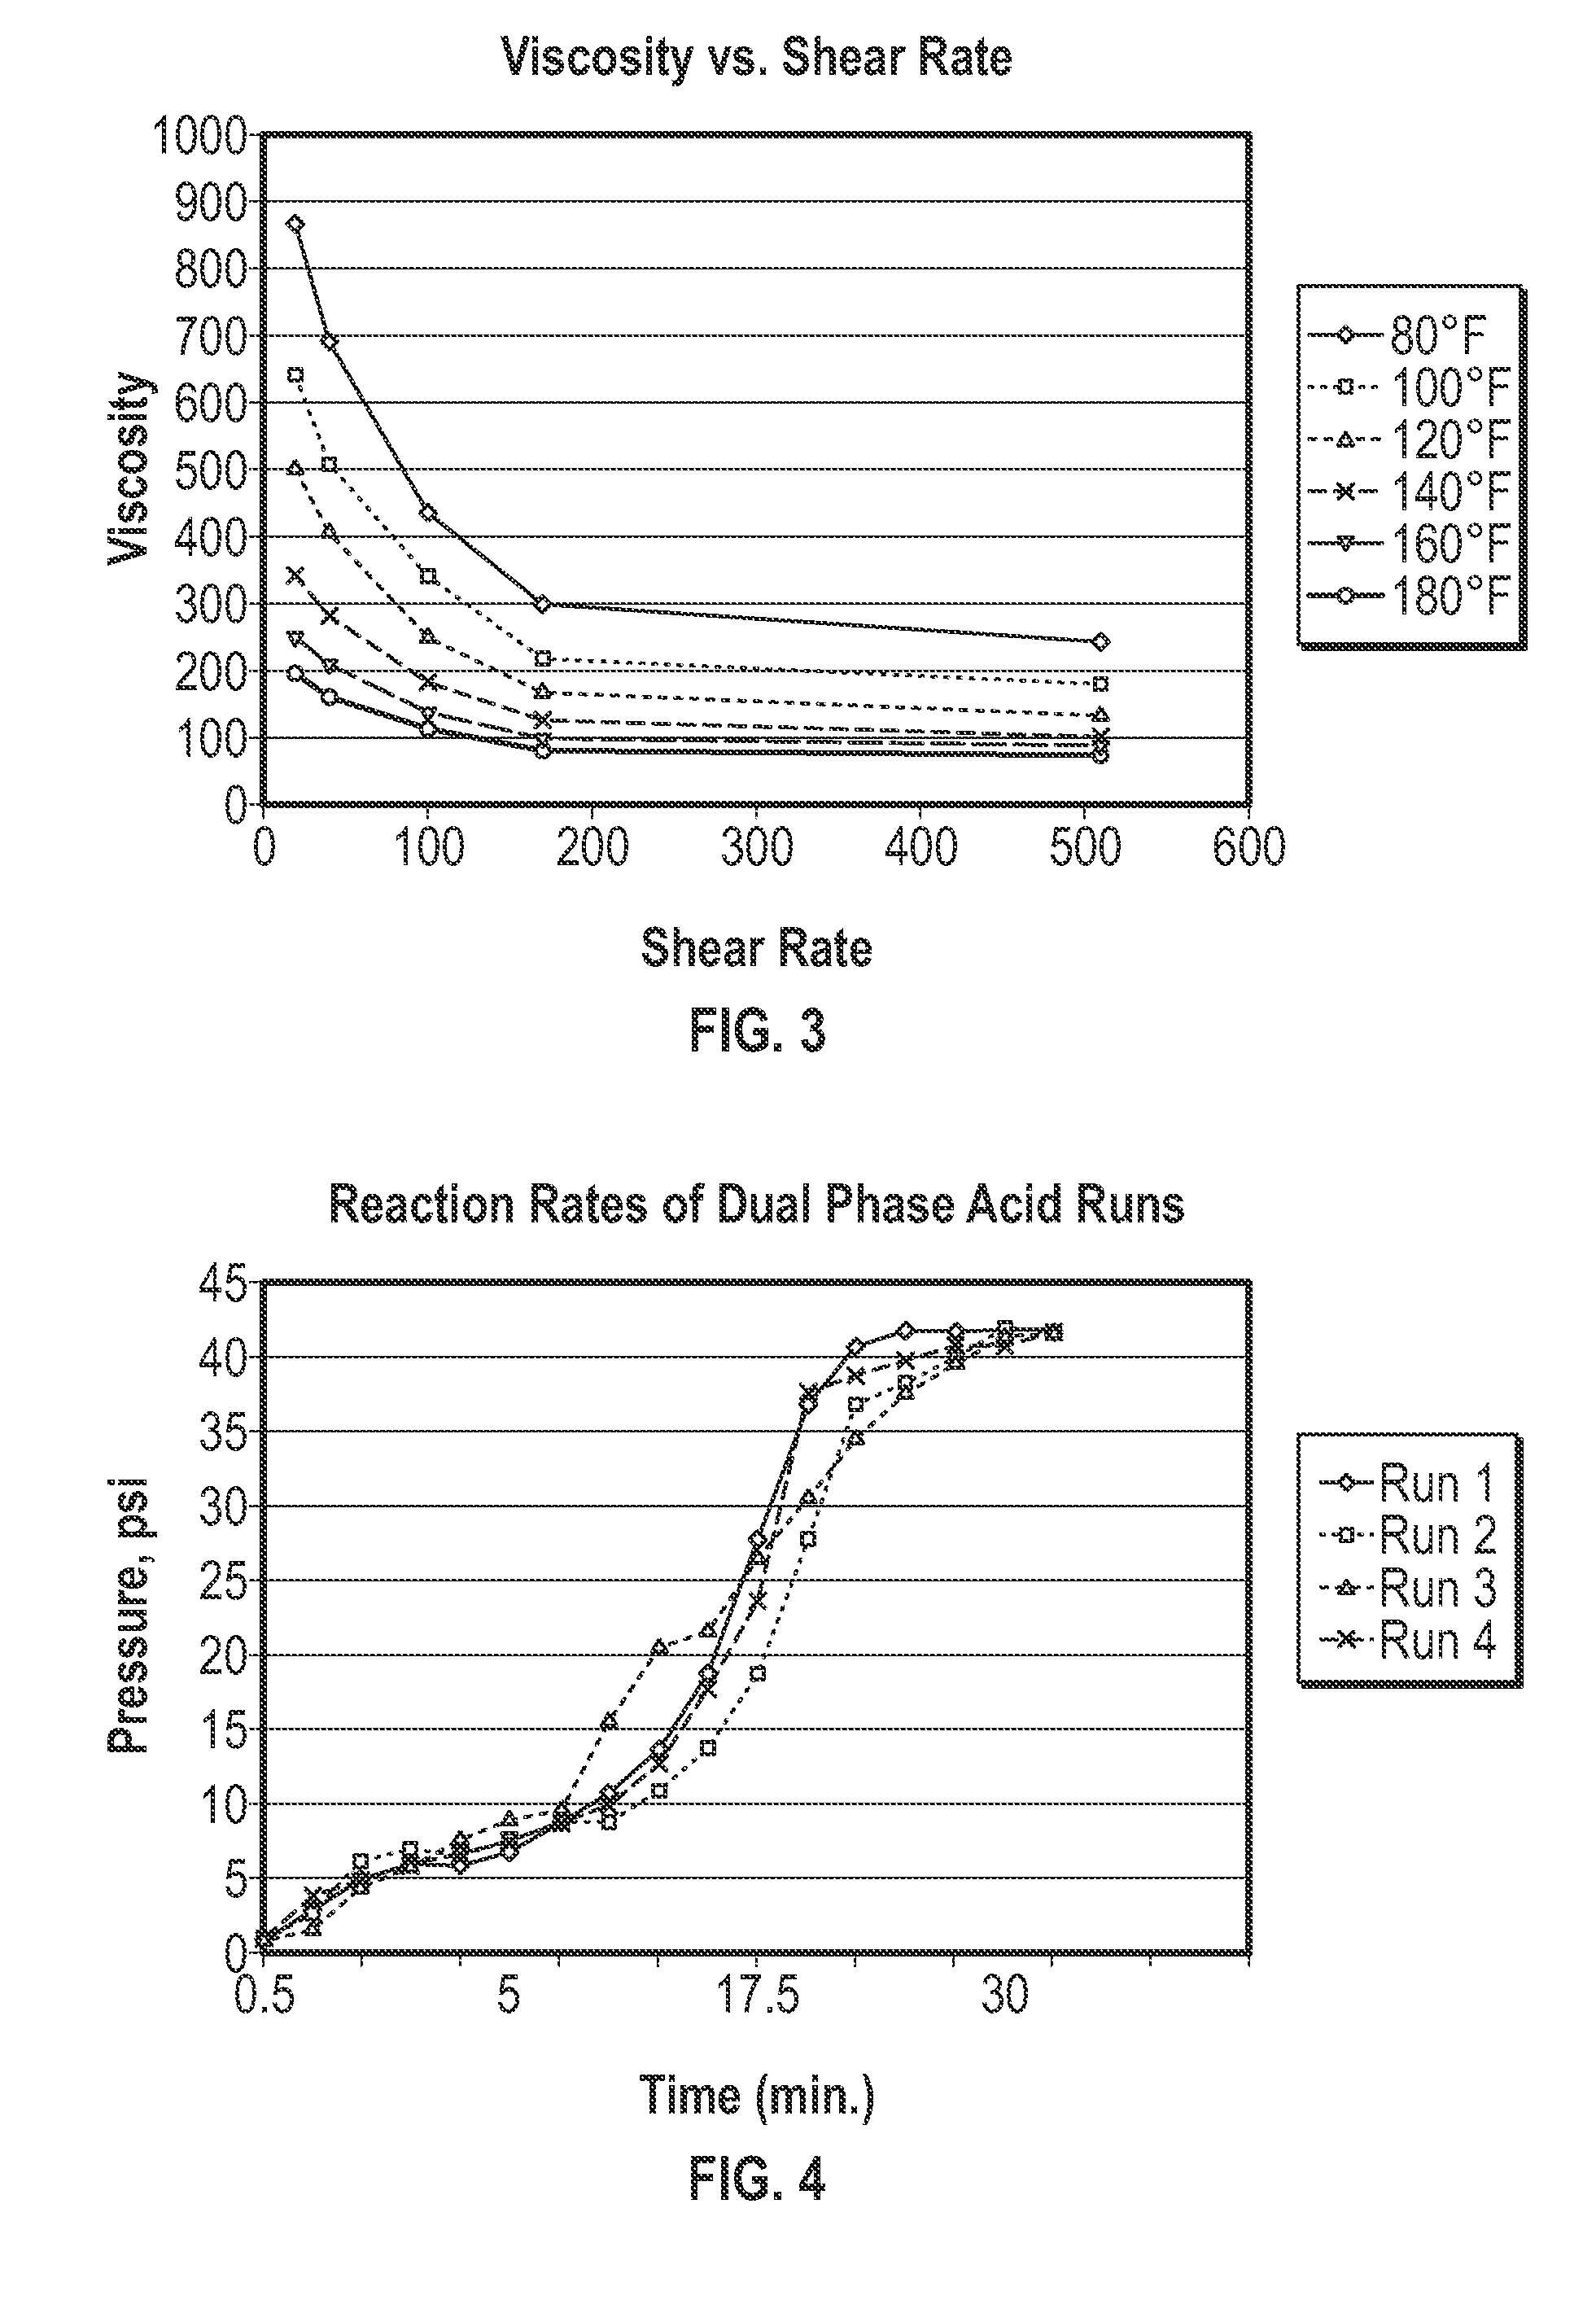 Acid-in-oil emulsion compositions and methods for treating hydrocarbon-bearing formations